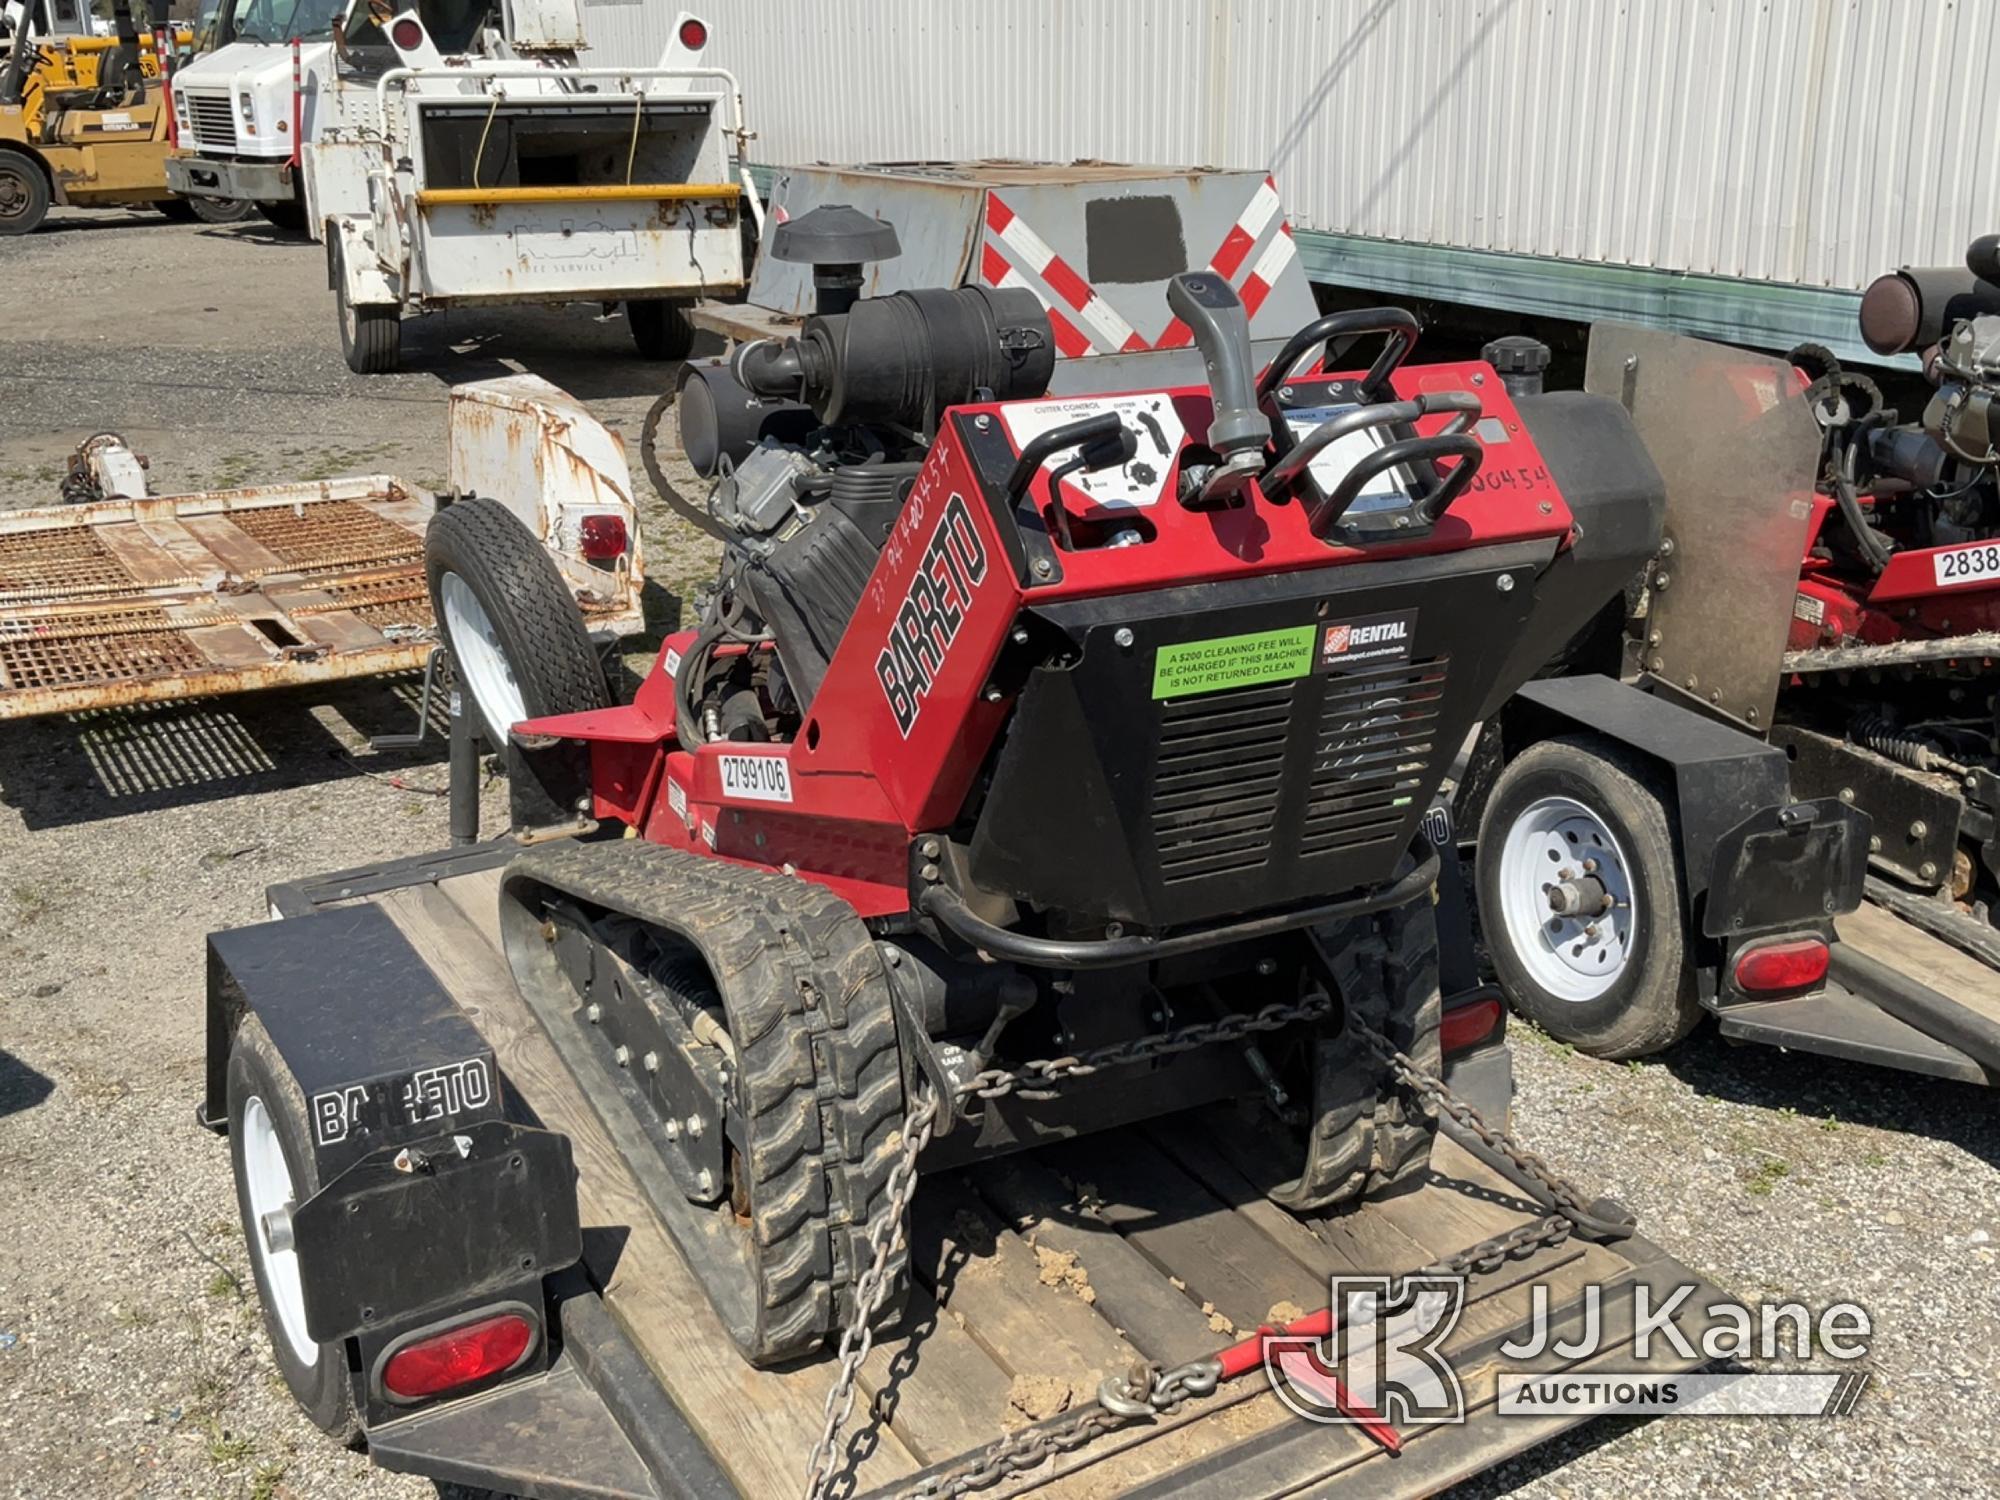 (Plymouth Meeting, PA) 2018 Barreto 30SG Walk-Behind Crawler Stump Grinder No Title For Support Trai